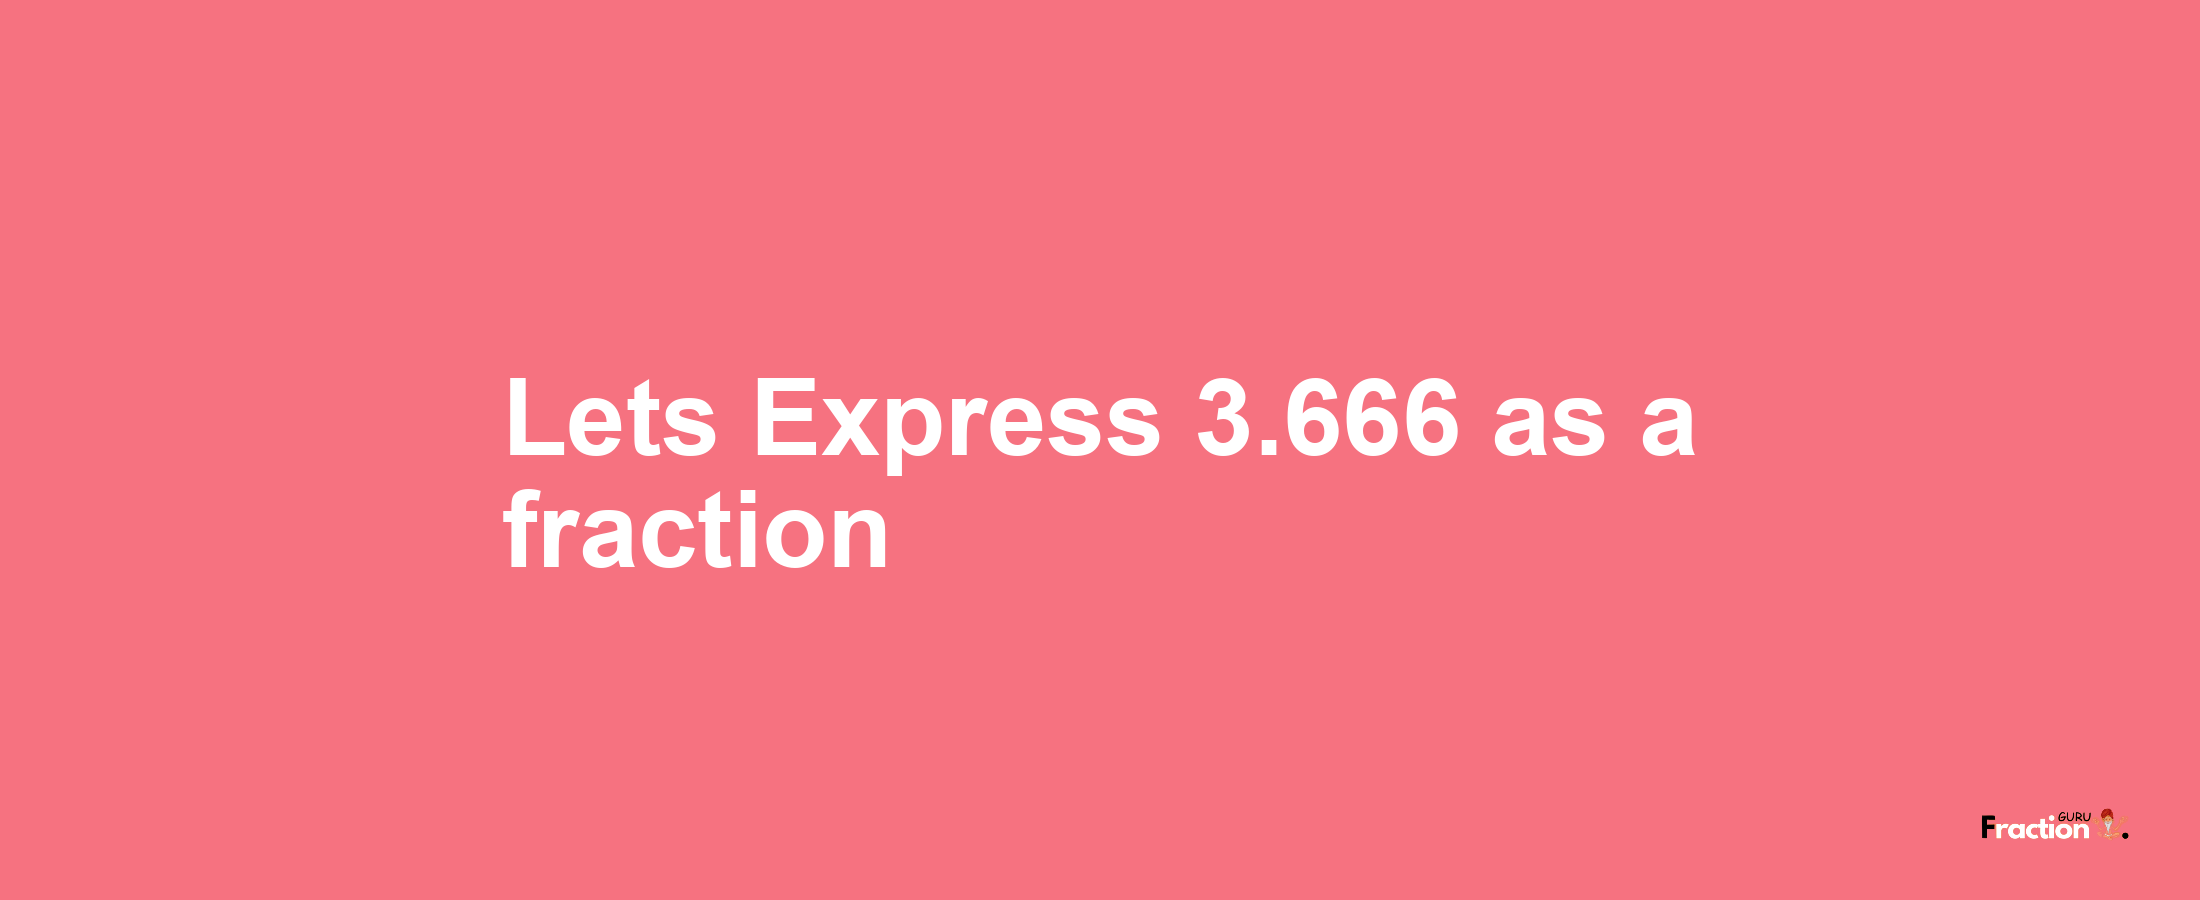 Lets Express 3.666 as afraction